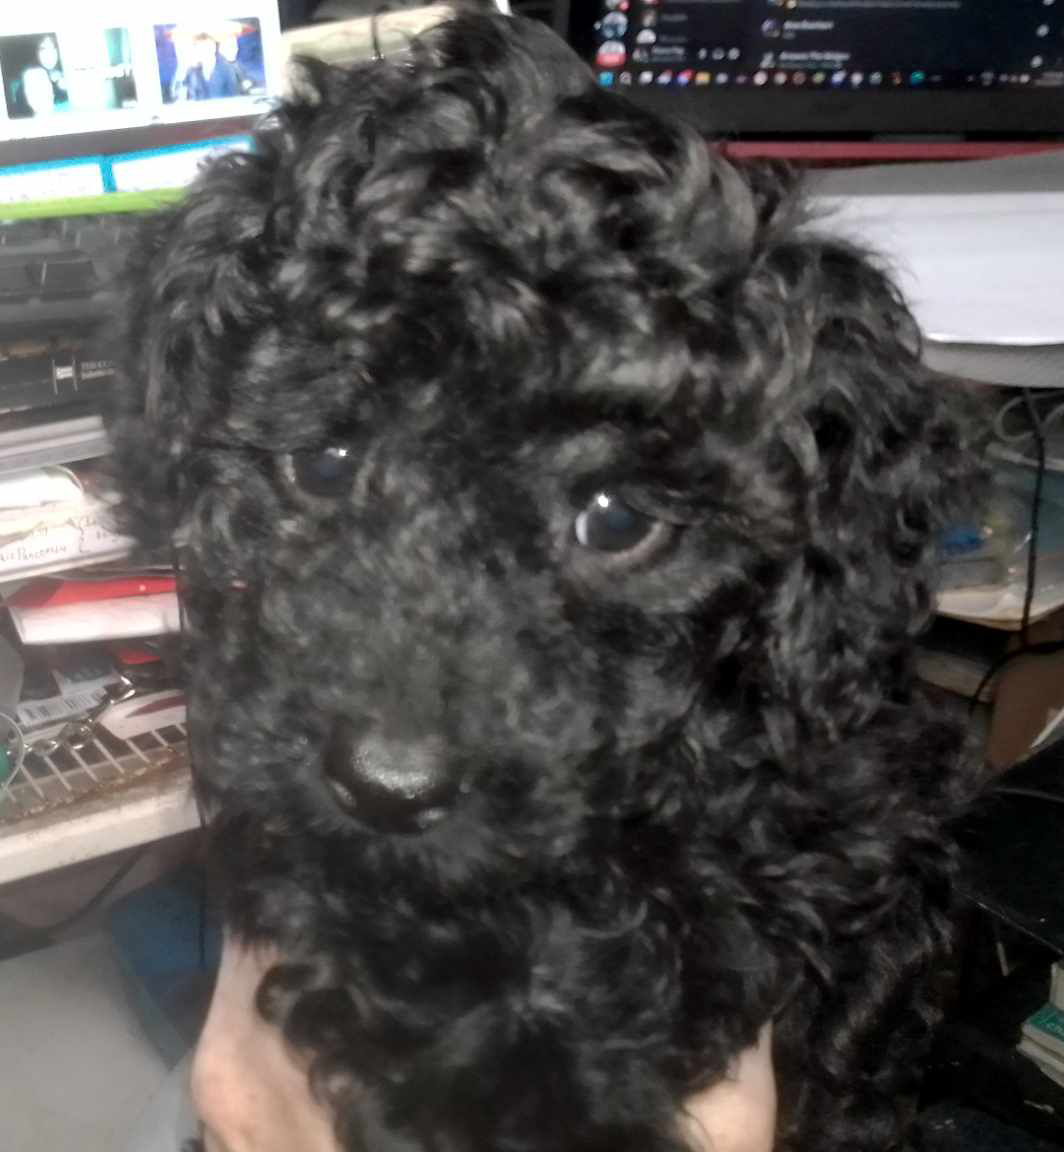 Toy Poodle - New Norfolk